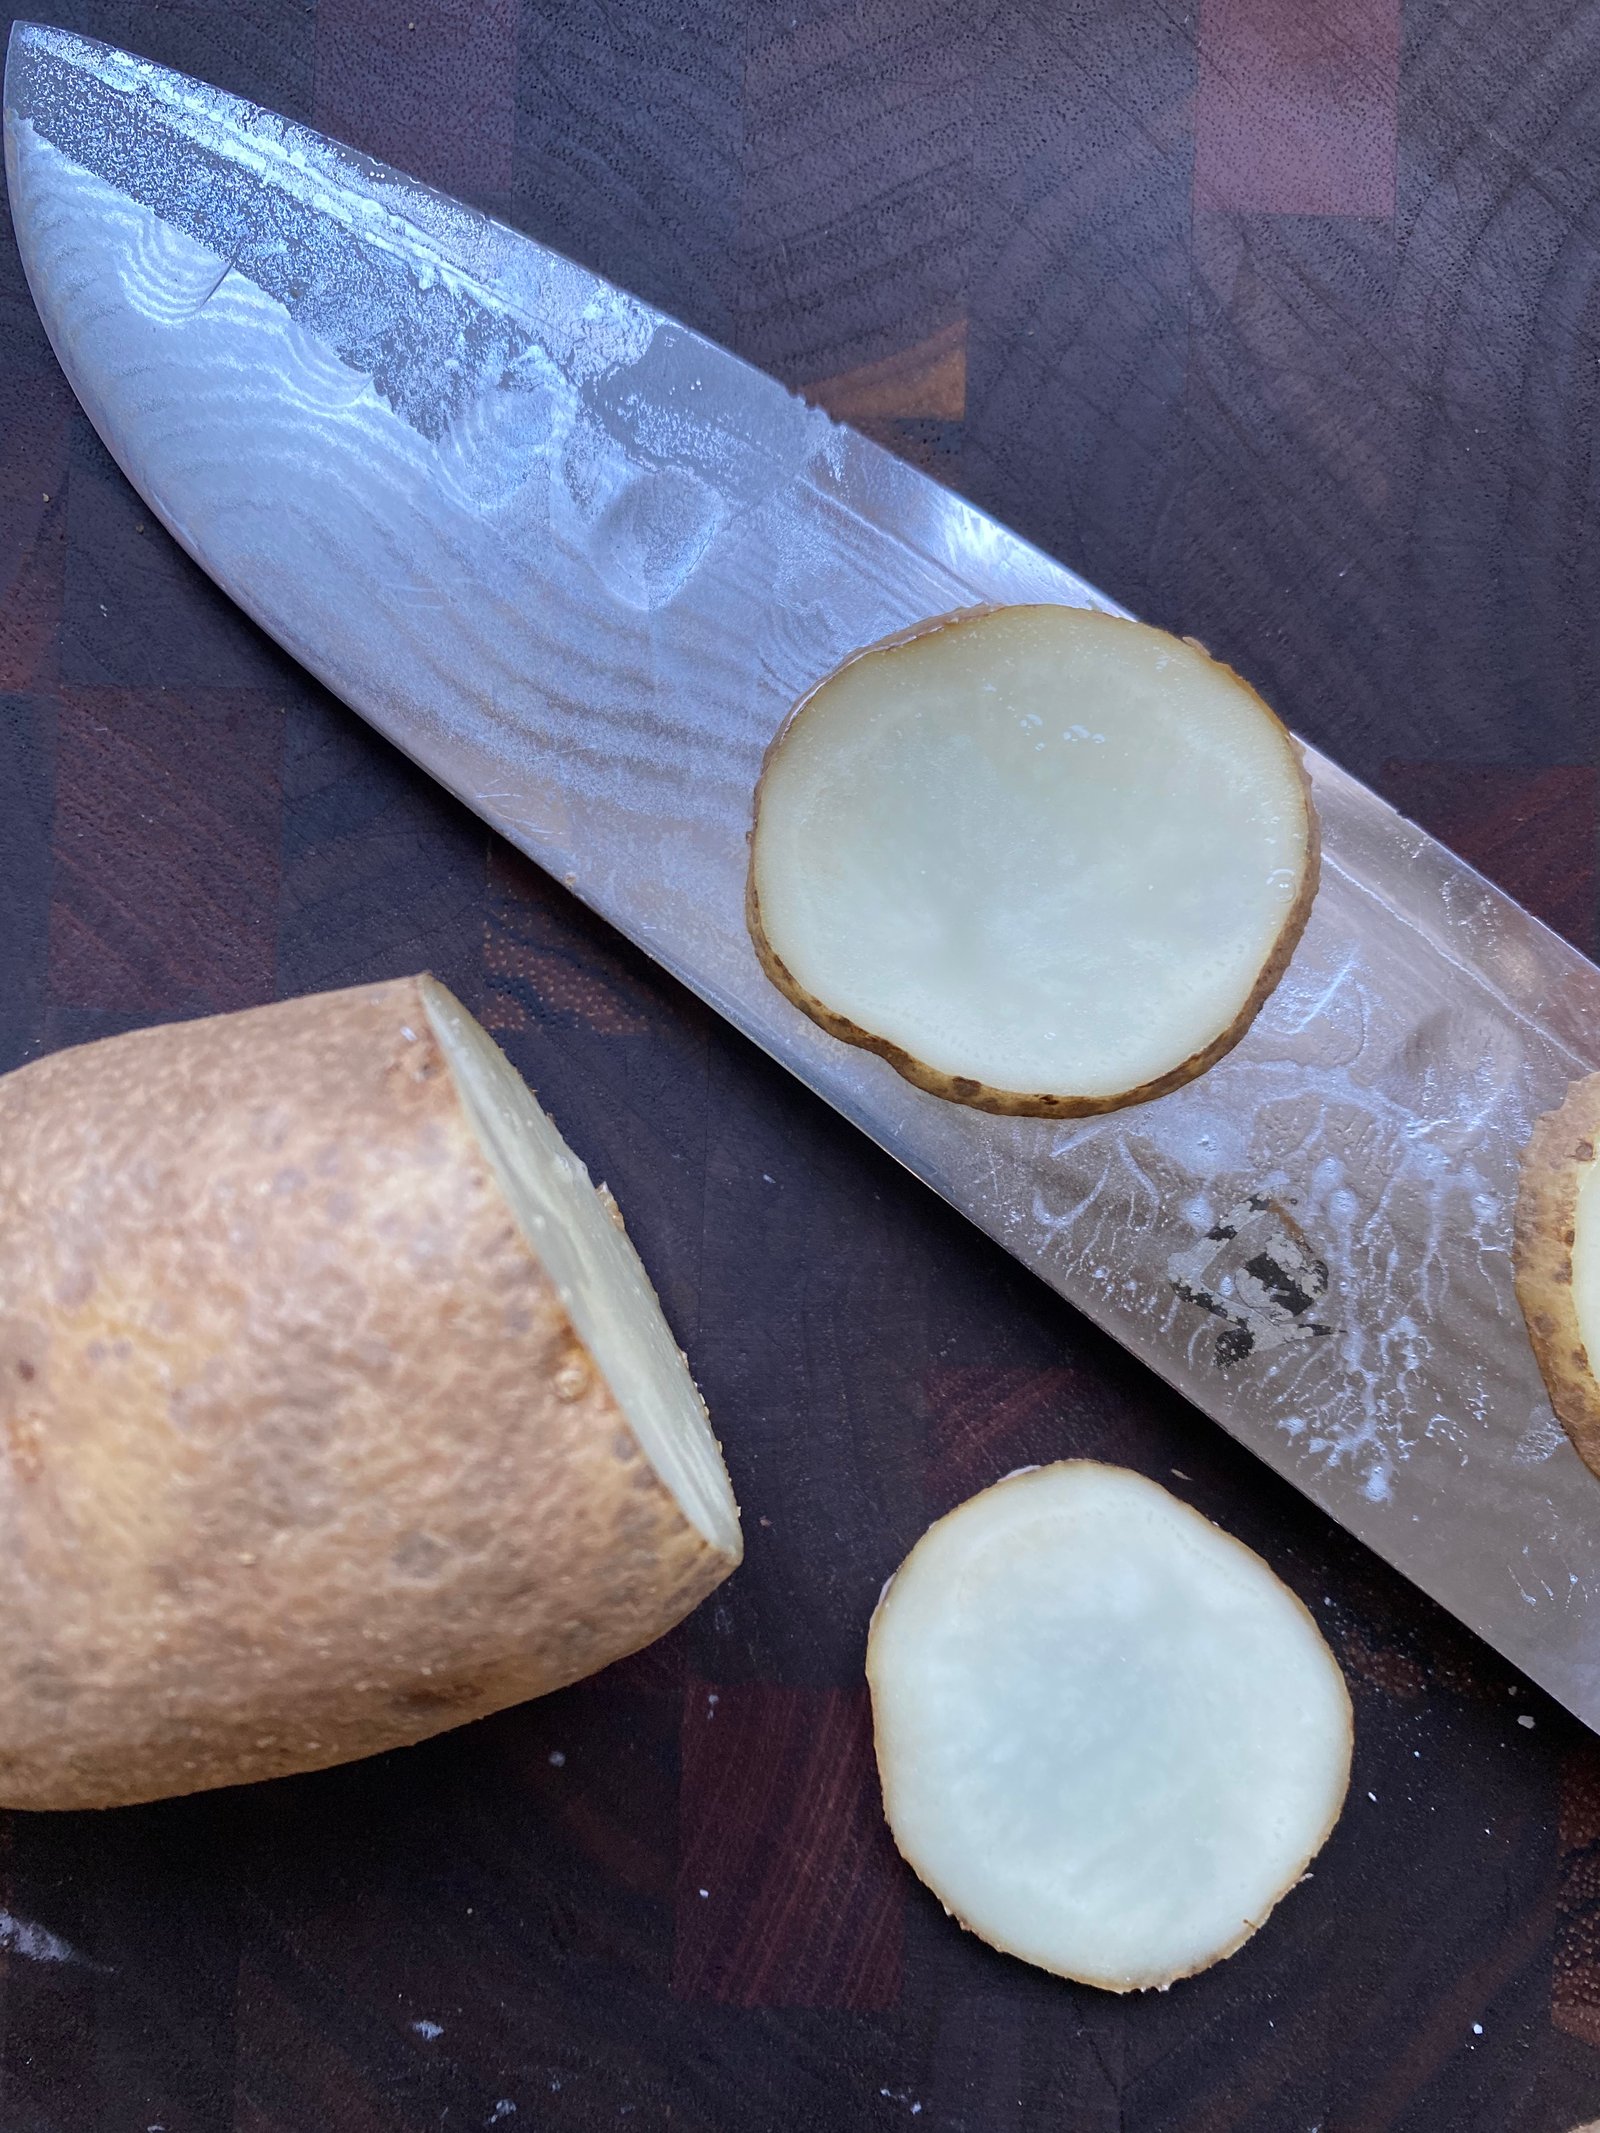 this is a photo of a knife slicing potatoes thin to make homemade potato chips